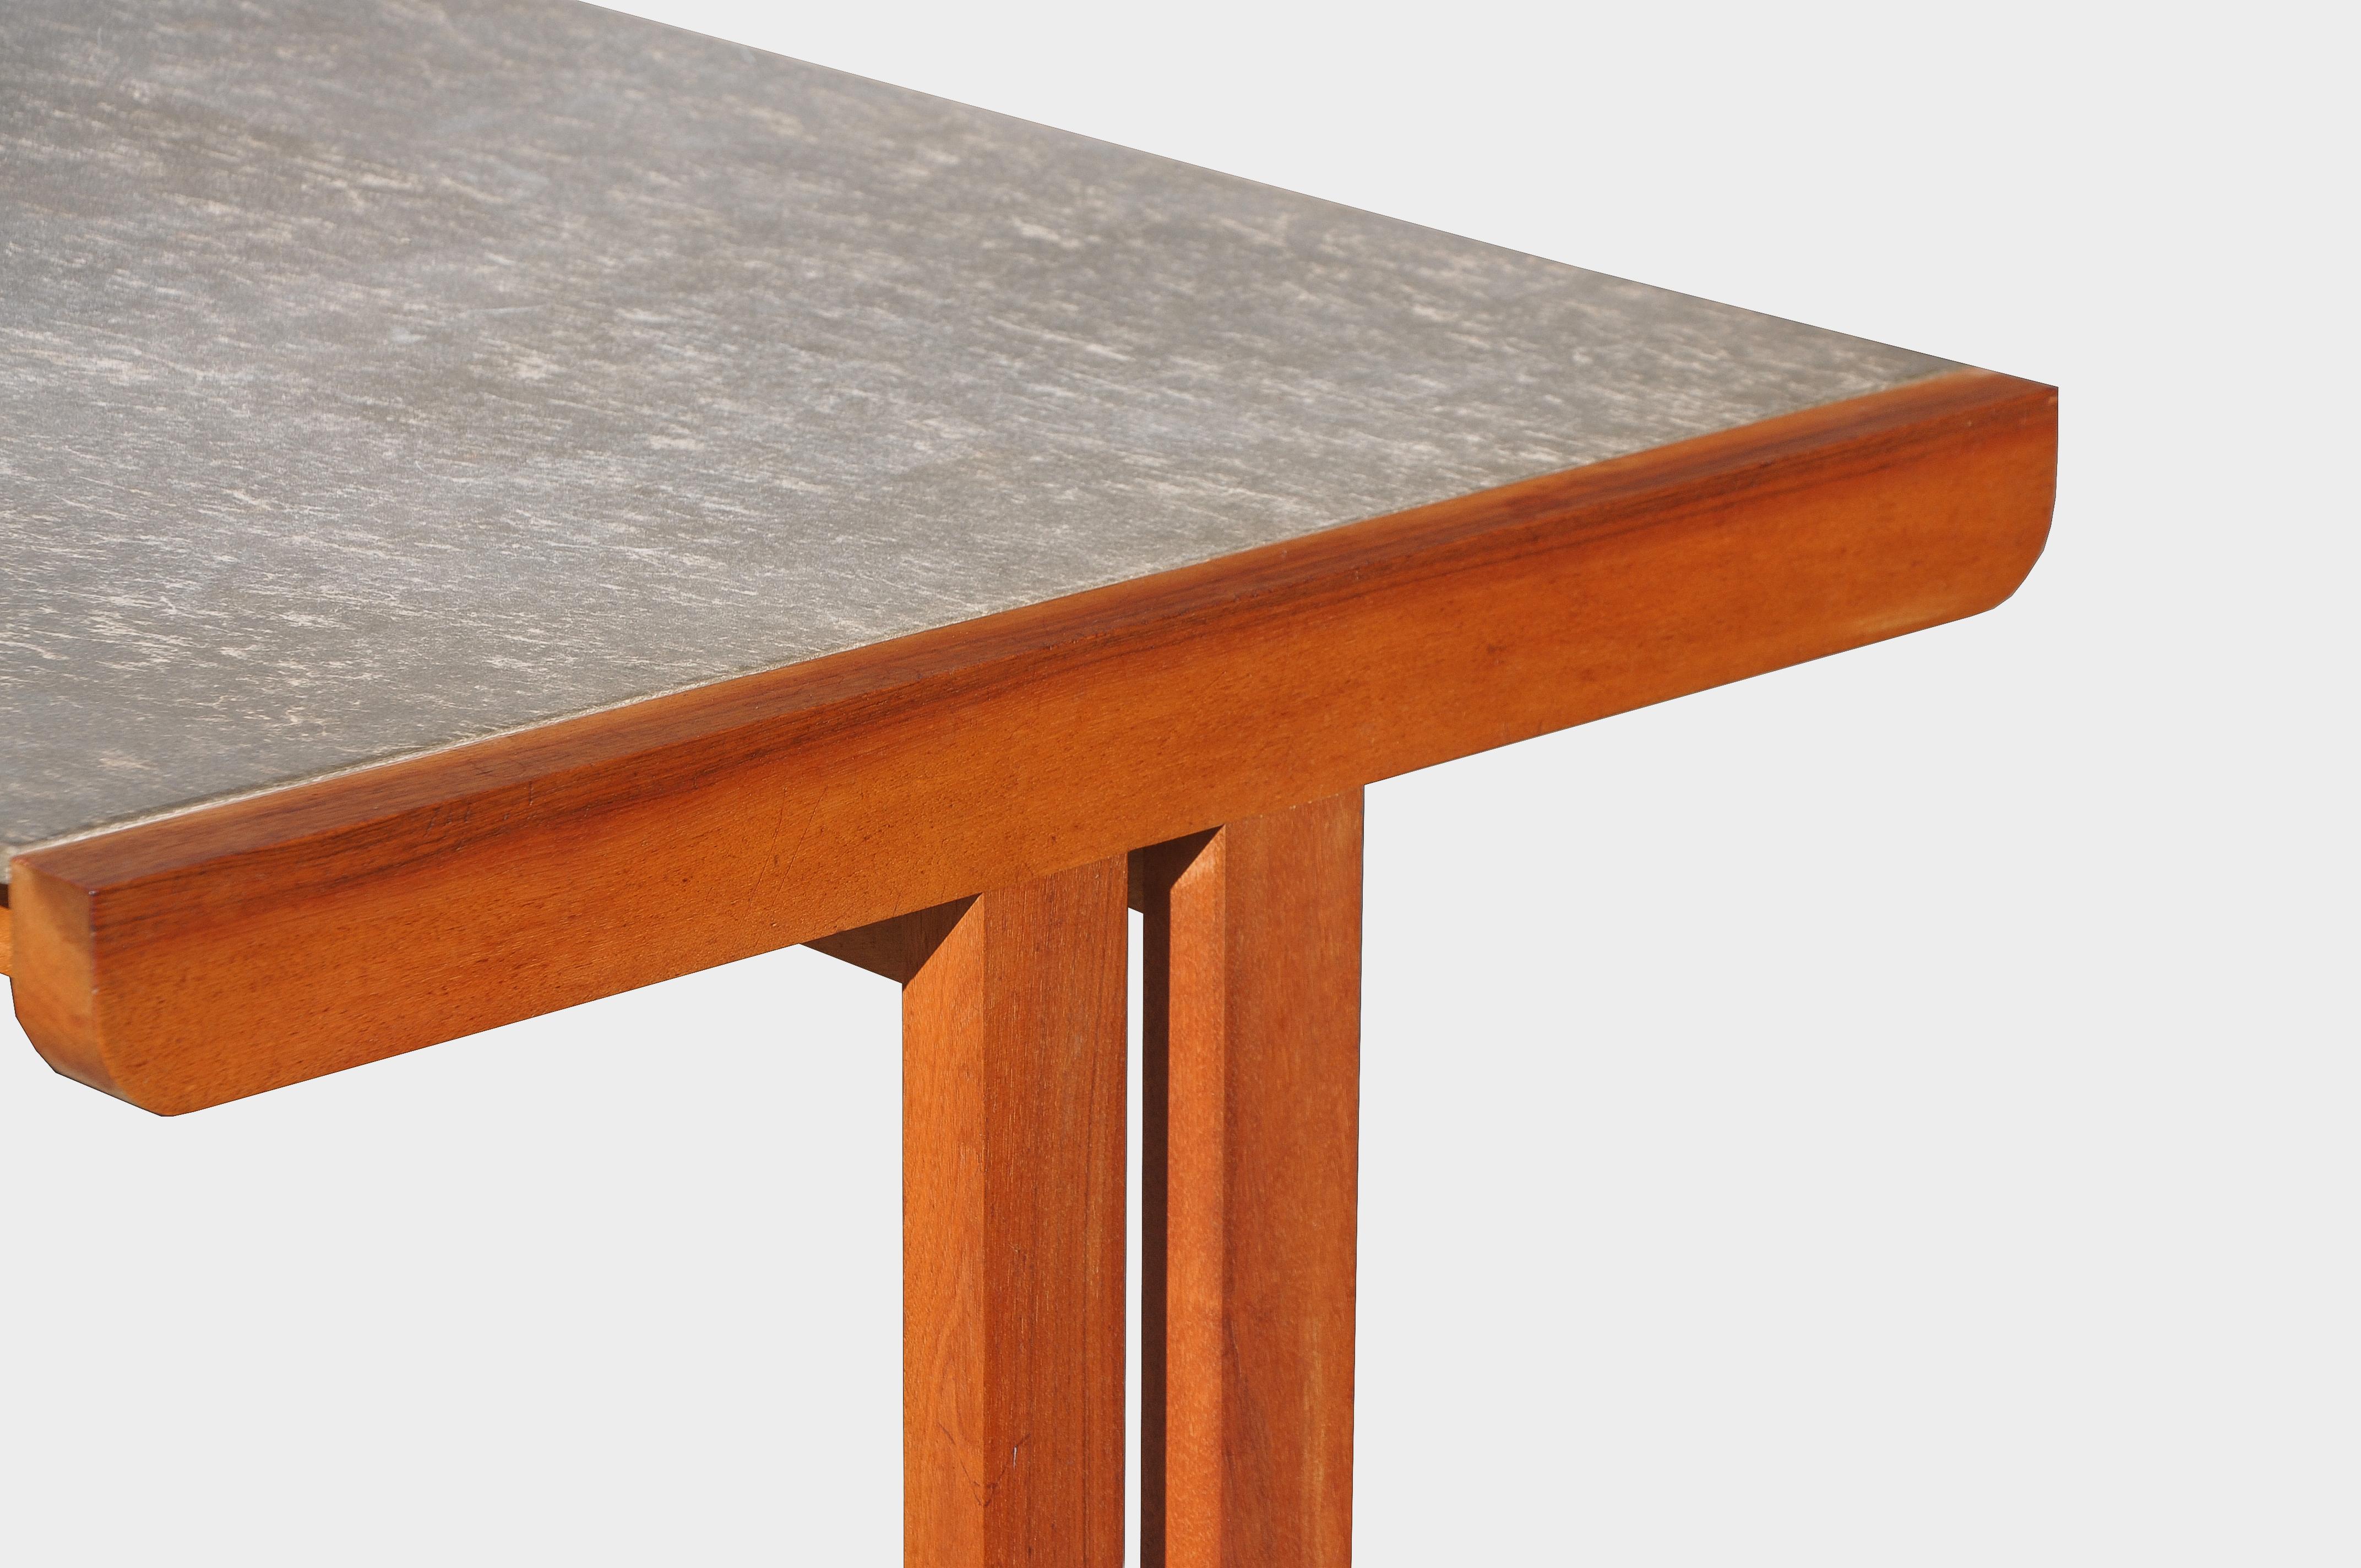 Swiss Dining Table Prototype by Benedikt Rohner Made of Walnut and Fibre Cement, 1955 For Sale